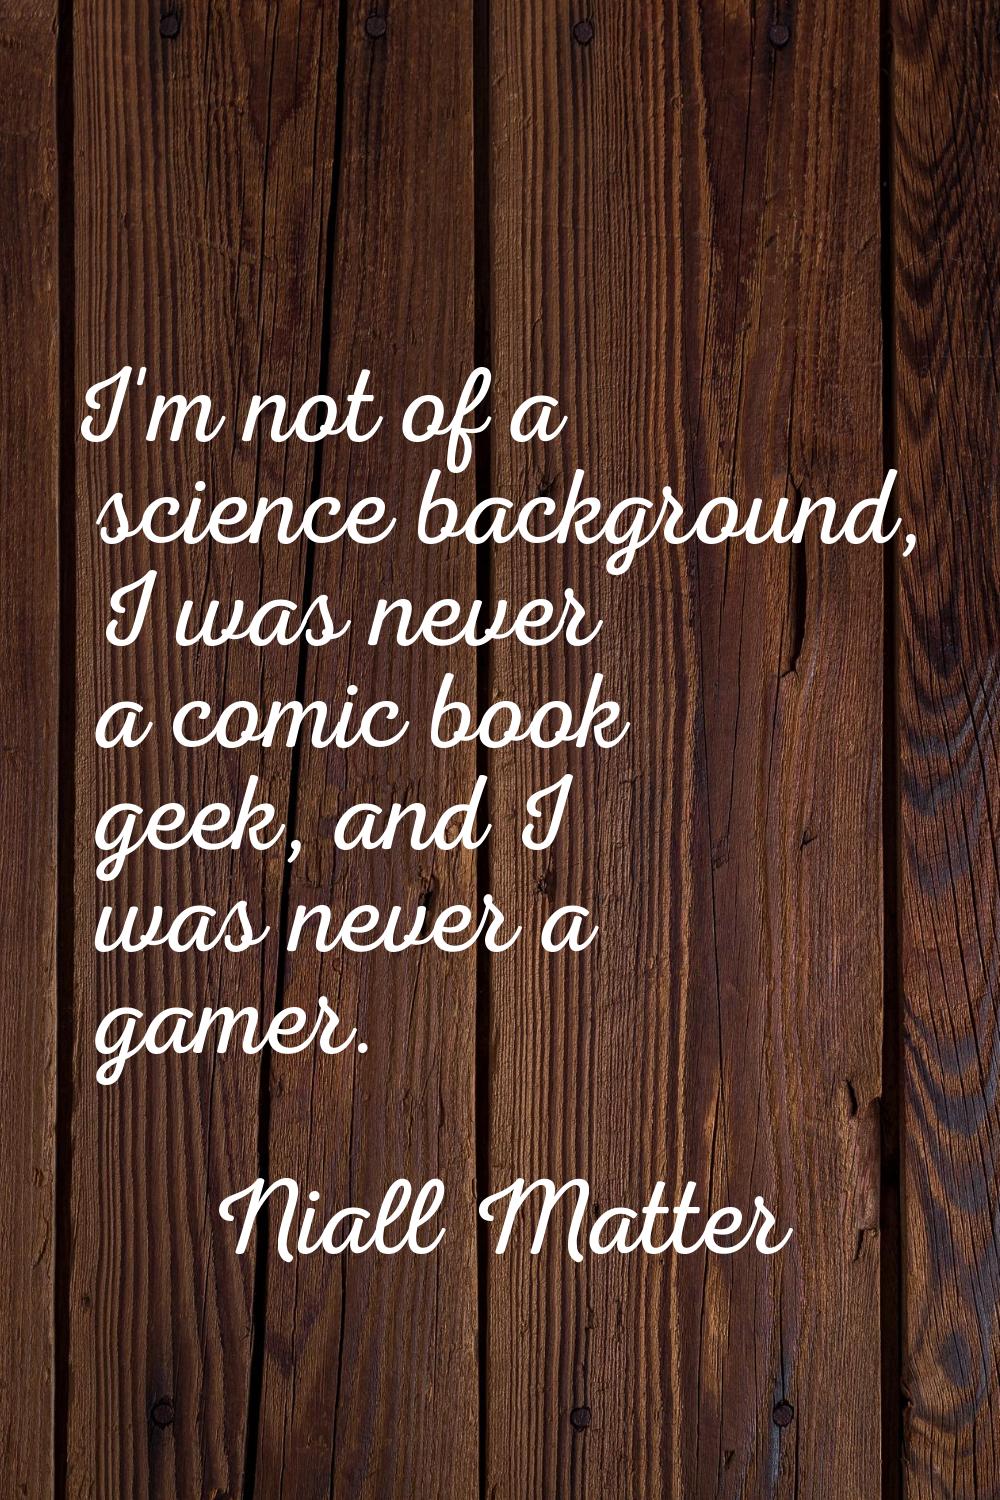 I'm not of a science background, I was never a comic book geek, and I was never a gamer.